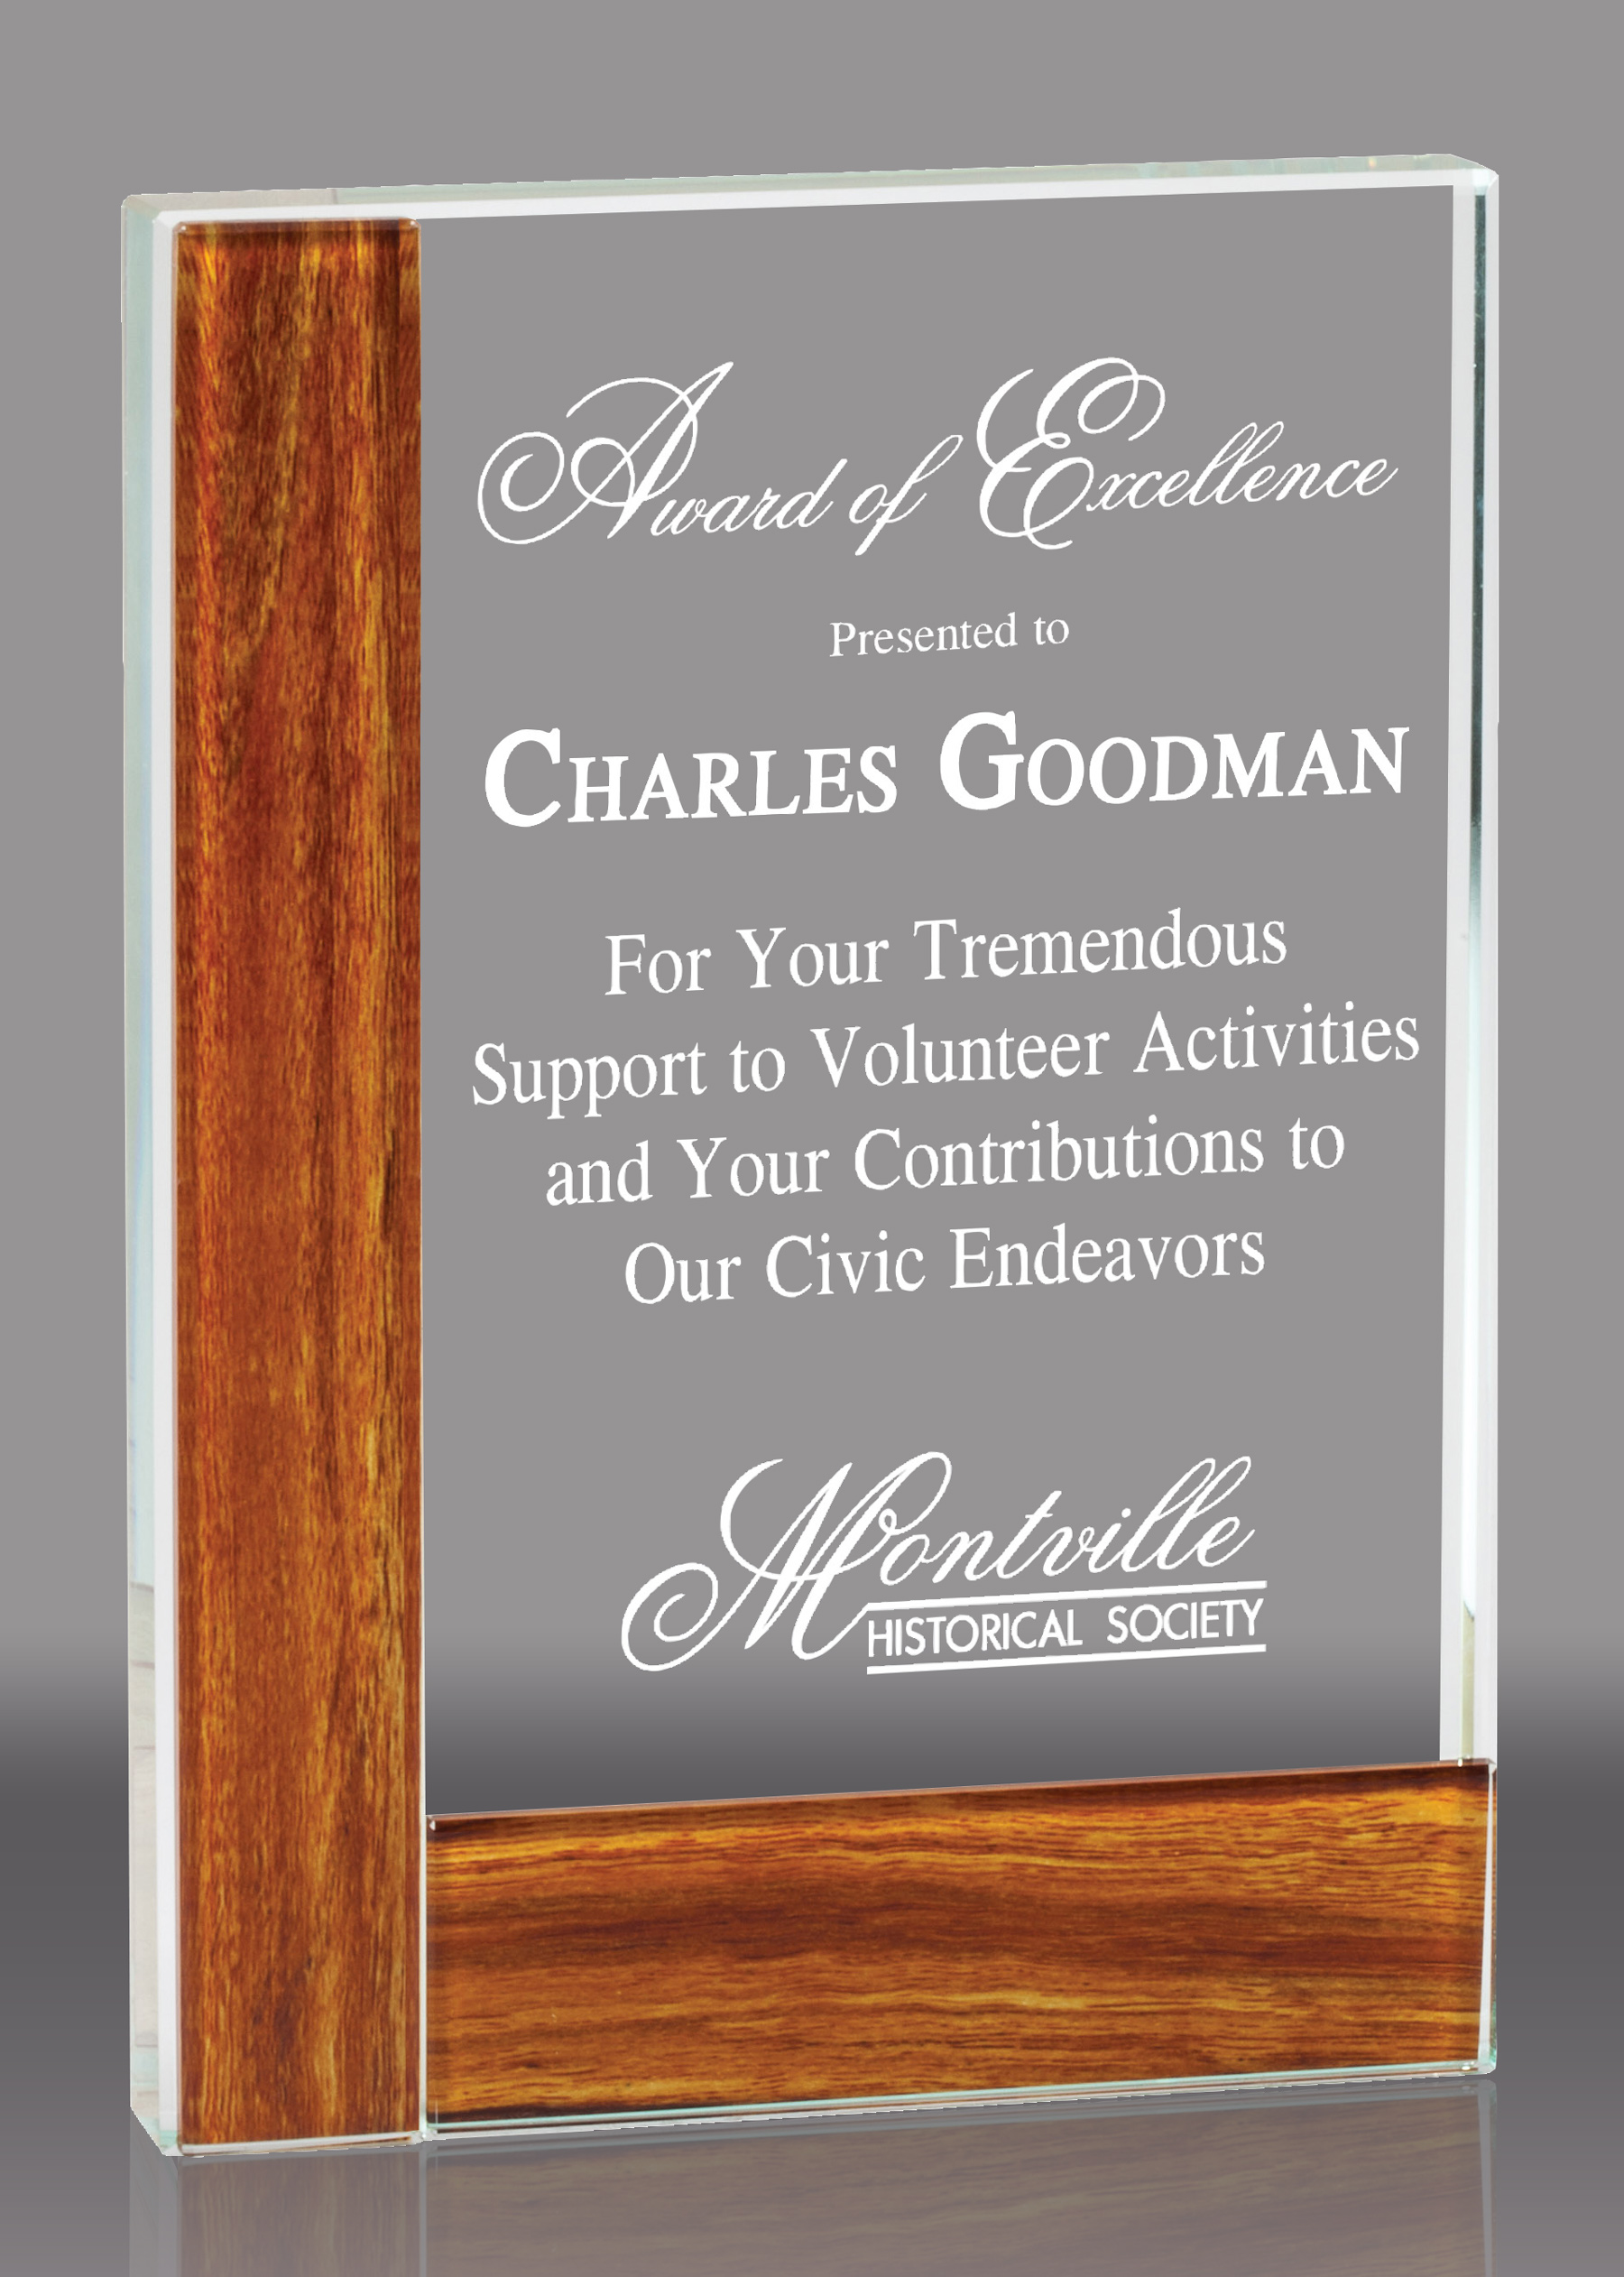 Rectangle Crystal Award with Wood Border - 8 inch